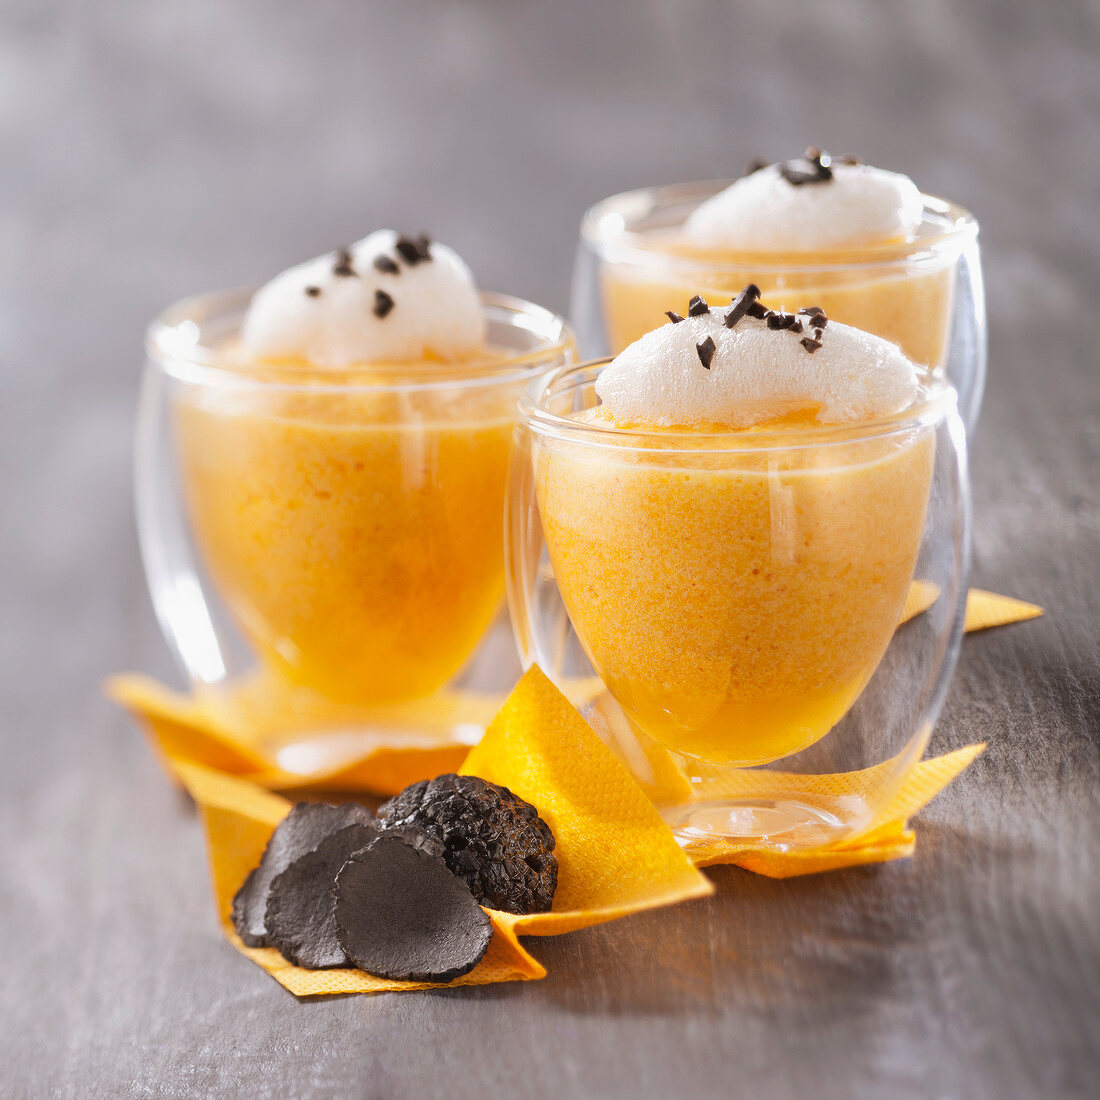 Pumpkin mousse with truffle emulsion